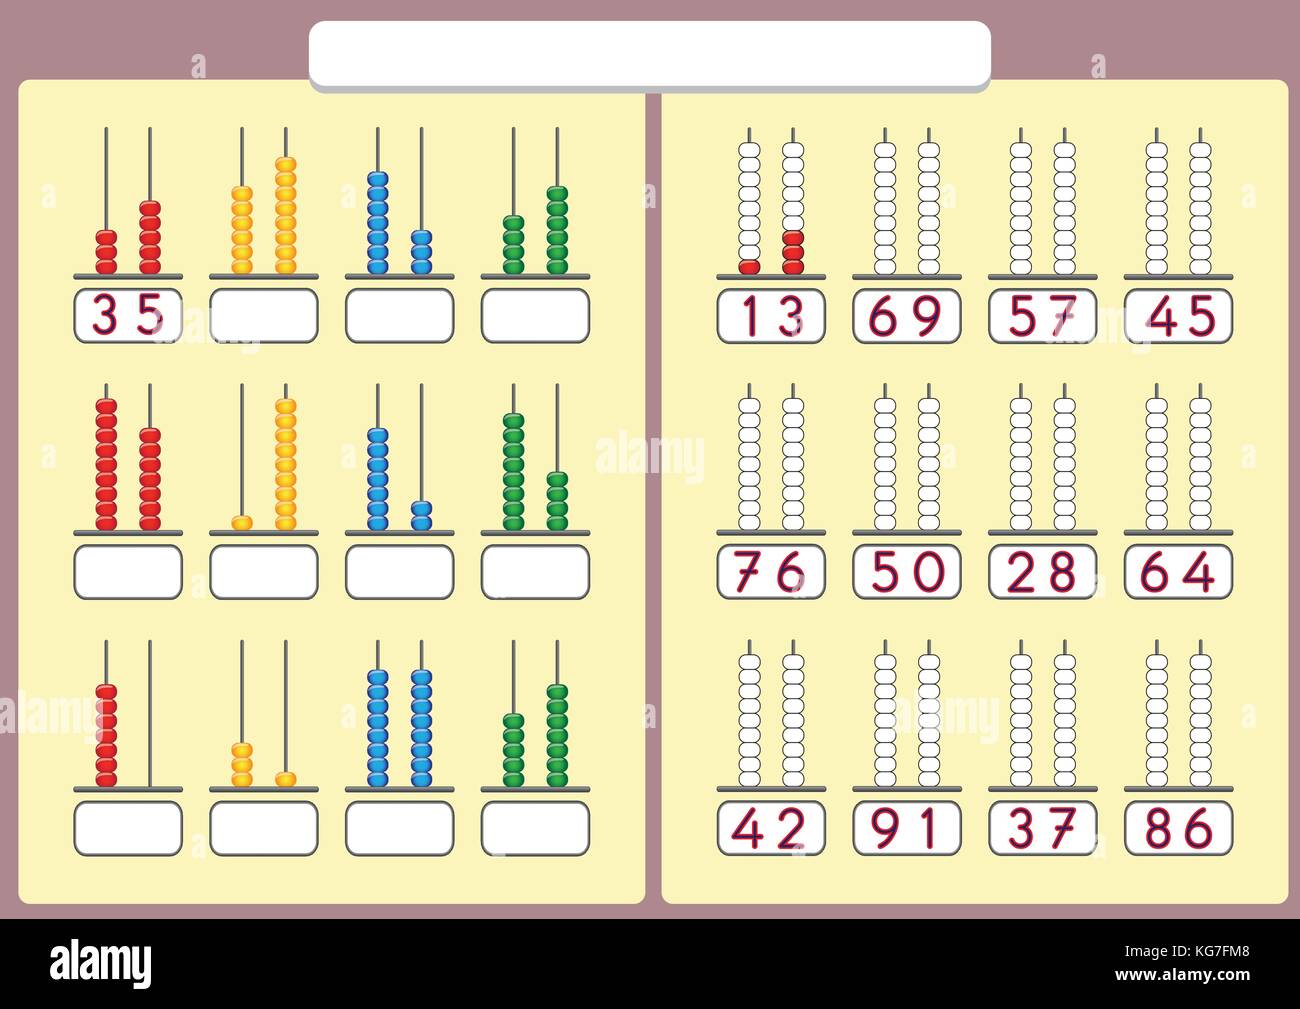 abacus line counting software free